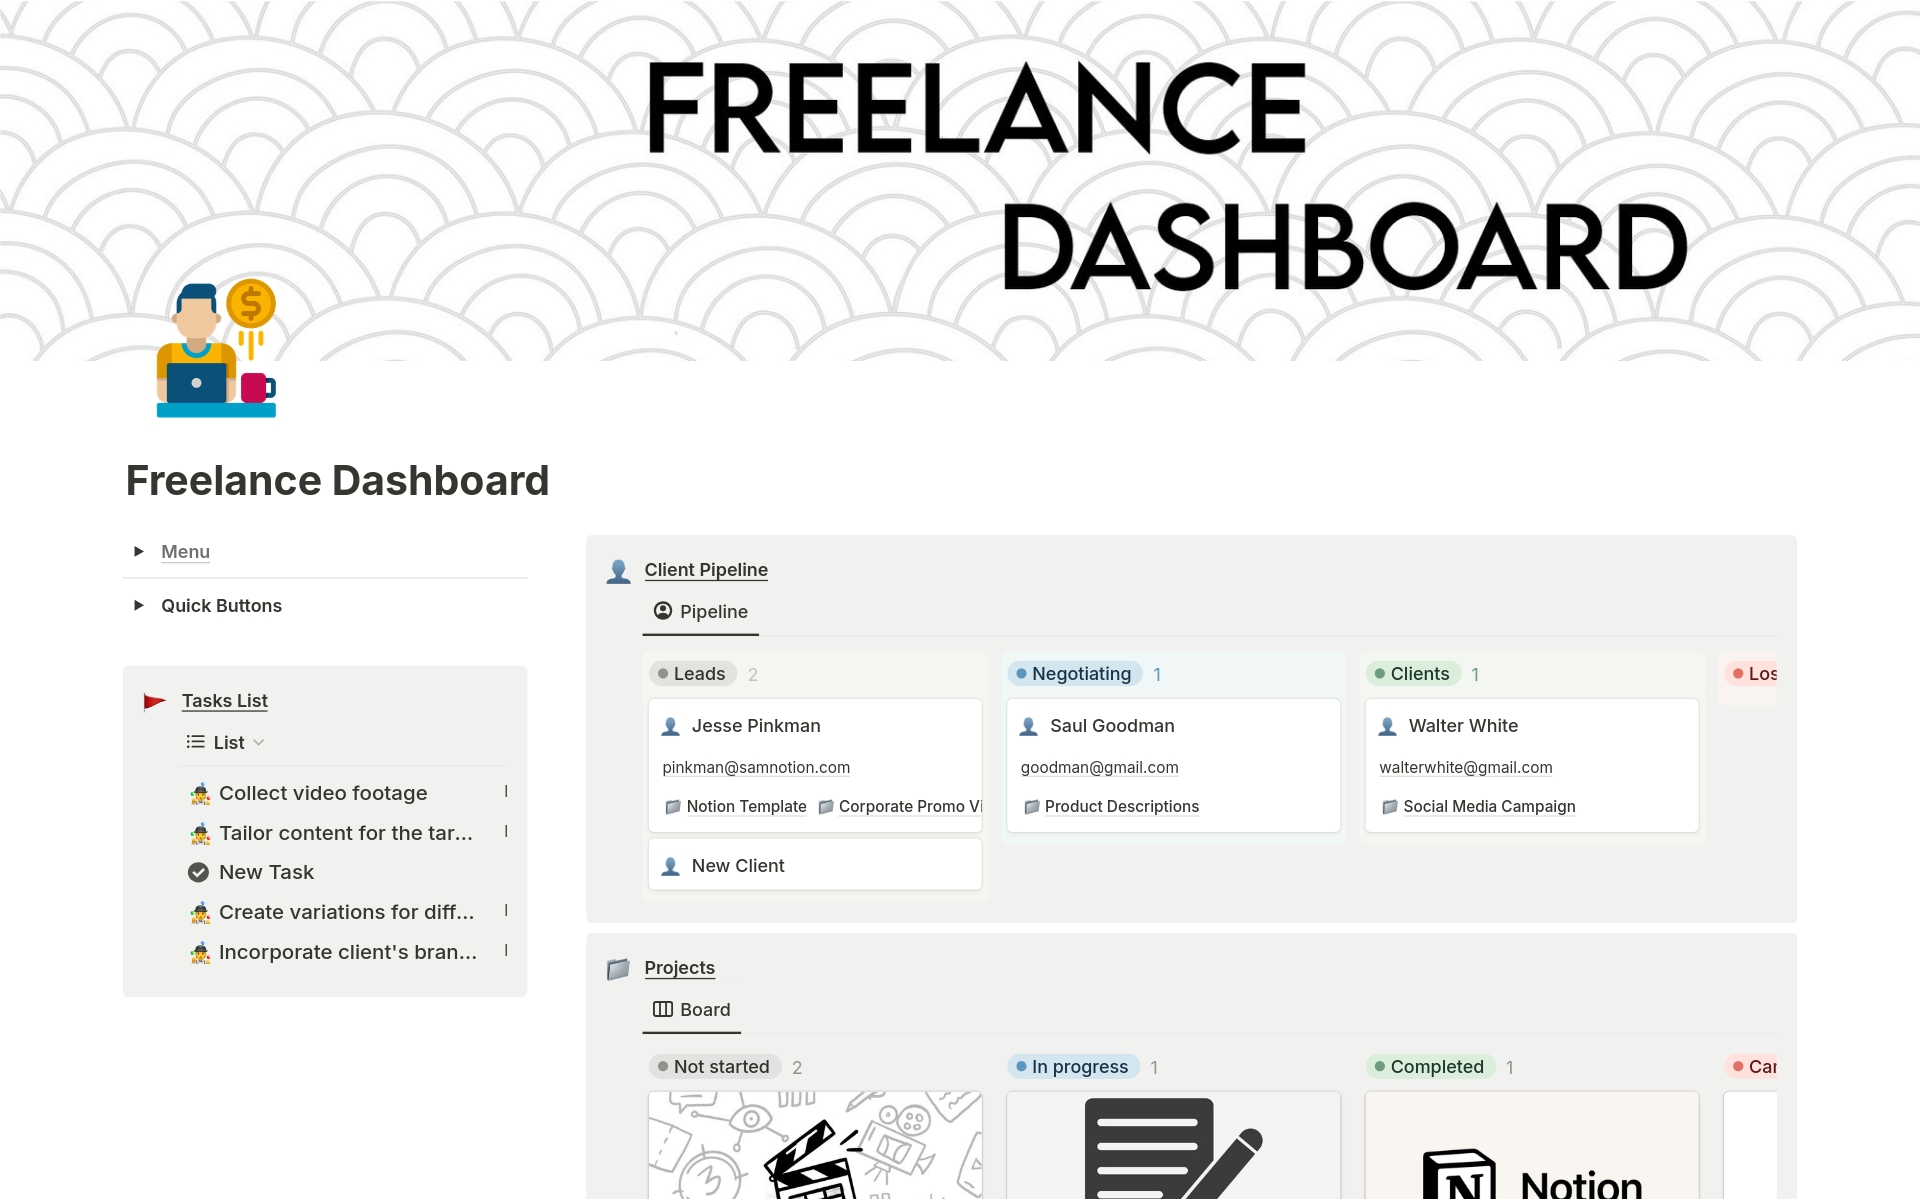 Introducing Your Essential Freelance Companion: All-in-one Freelance Dashboard which help you to Seamlessly oversee your clients, projects, tasks, and finances in one place.